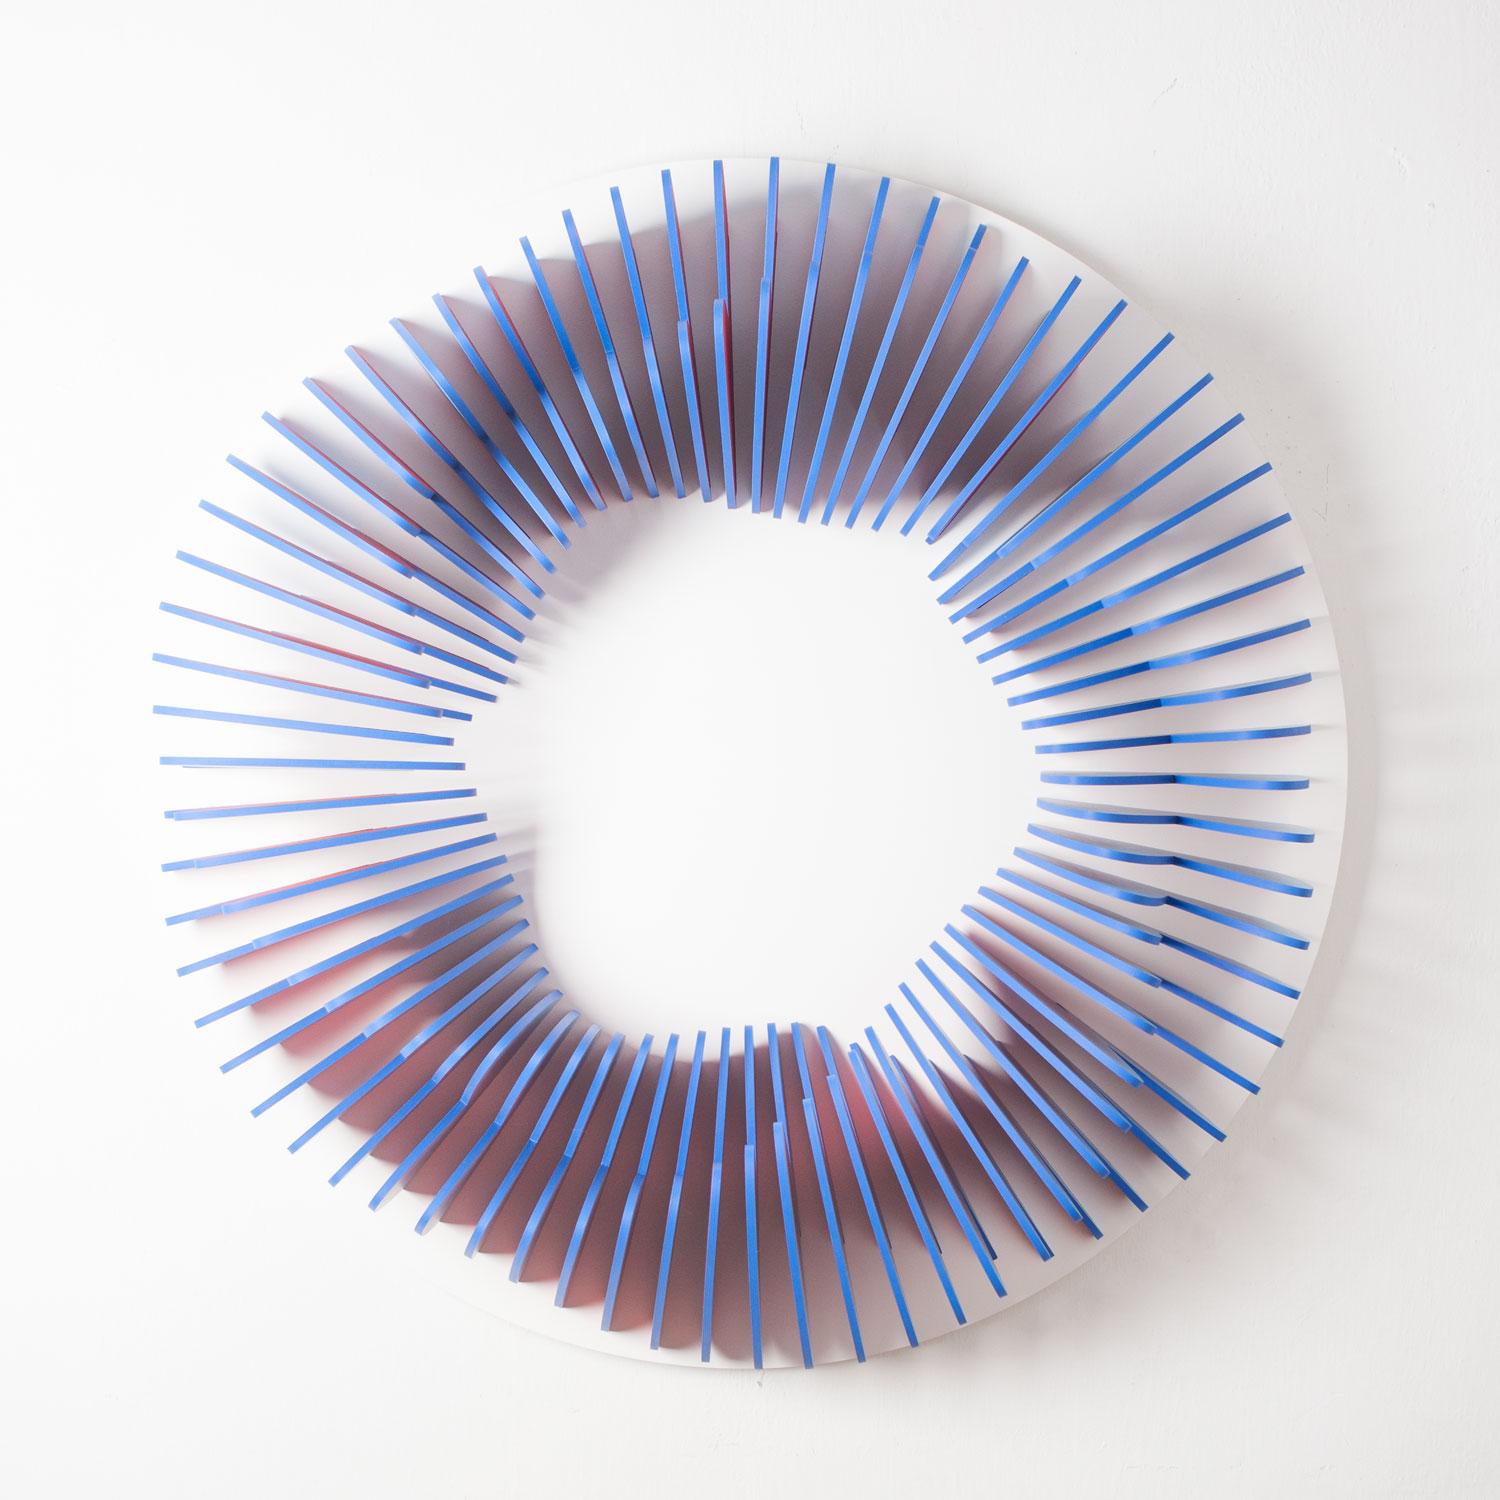 Anna Kruhelska is a visual artist and architect working across fields of art and design. She creates abstract, three-dimensional paper wall reliefs that startle in their intricacy and meticulous execution. As a lover of minimalism and simplicity,